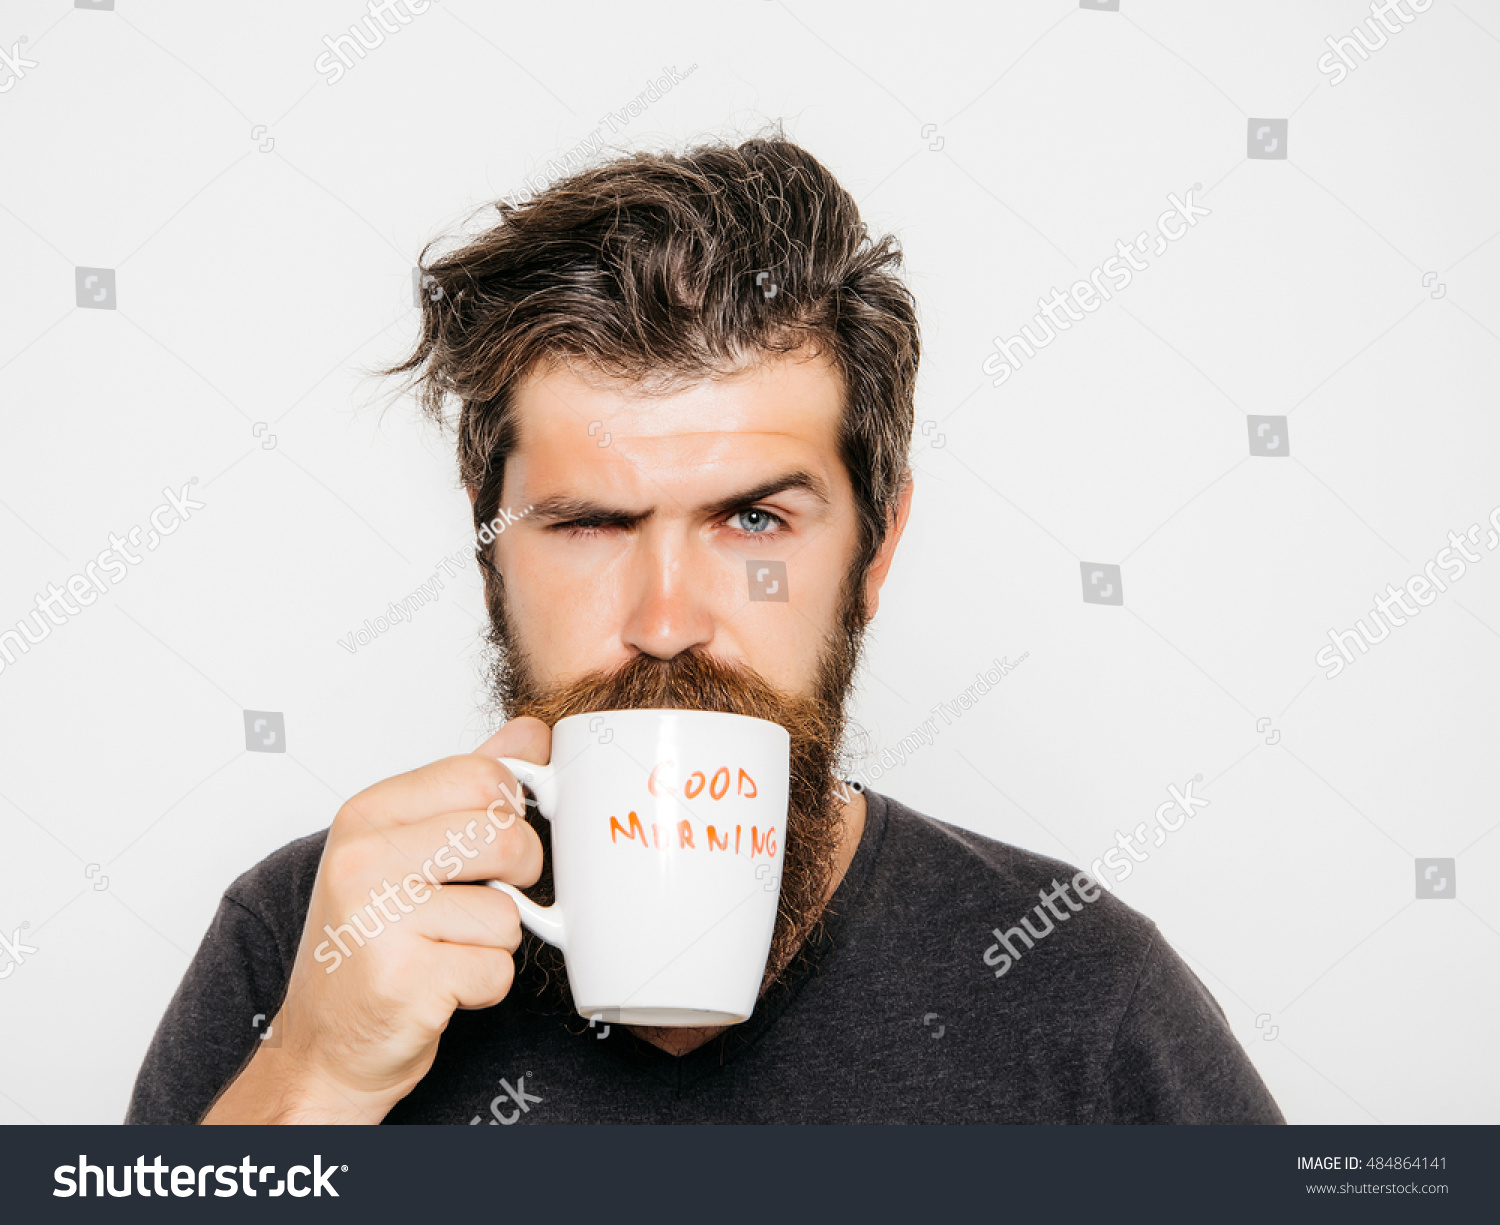 handsome bearded man with stylish hair beard and mustache on serious face in shirt holding white cup or mug with good morning text drinking tea or coffee in studio on grey background #484864141